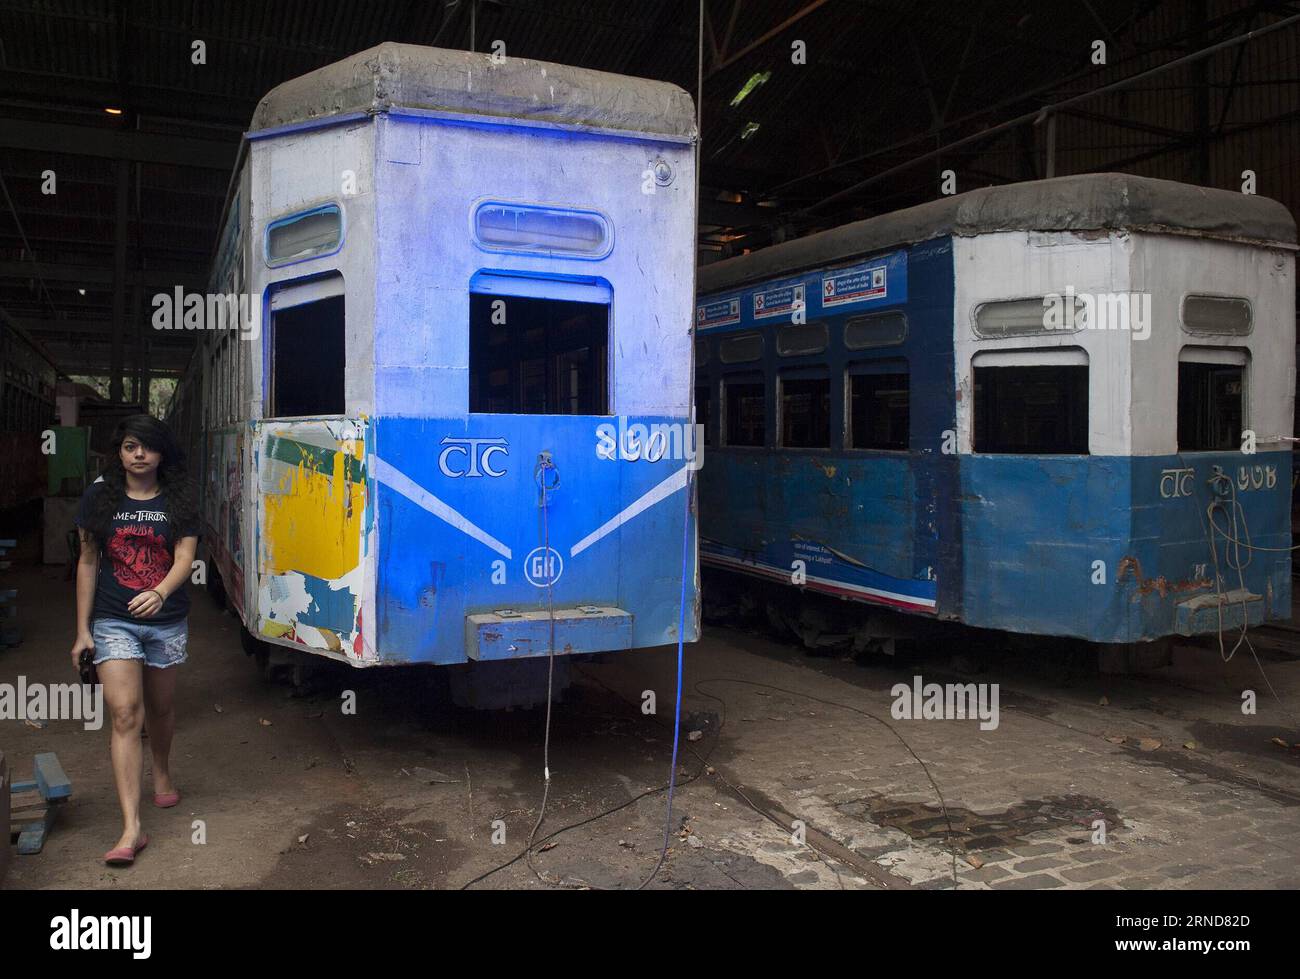 (160509) -- KOLKATA, May 9, 2016 -- A visitor walks beside tramcars during the two-day event Tram Tales at a tram depot in Kolkata, capital of eastern Indian state West Bengal, May 8, 2016. Tram Tales was planned as a unique mixed - media interactive visual installation piece using videos, music, photography, games, food and interaction to celebrate the nostalgia of trams as a symbol of Kolkata s rich colonial-era heritage. The event was held from May 7 to 8. ) INDIA-KOLKATA-TRAM TALES TumpaxMondal PUBLICATIONxNOTxINxCHN   160509 Kolkata May 9 2016 a Visitor Walks Beside tramcars during The Tw Stock Photo